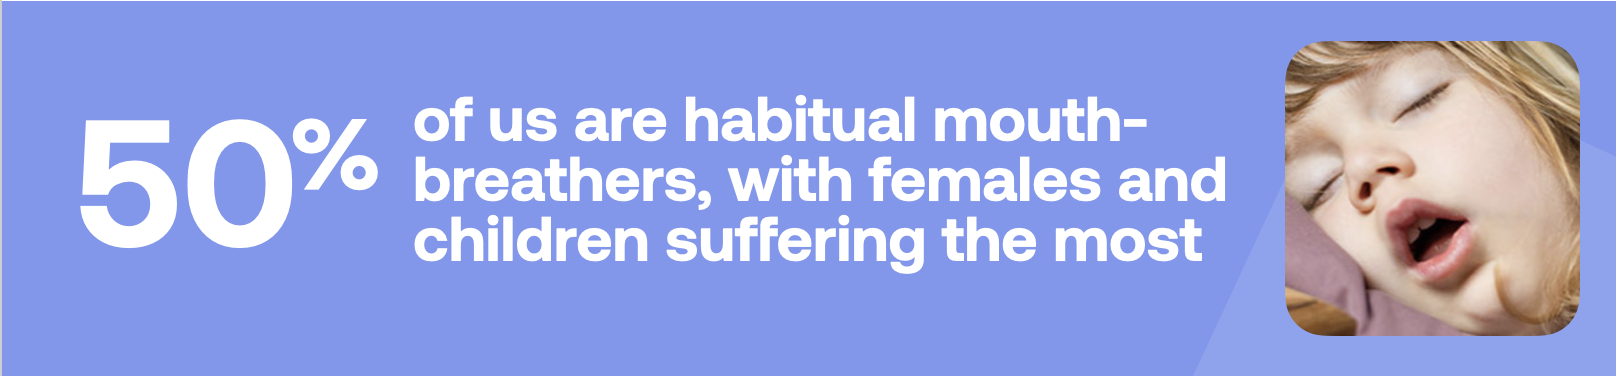 50% of us are habitual mouth-breathers, with females and children suffering the most